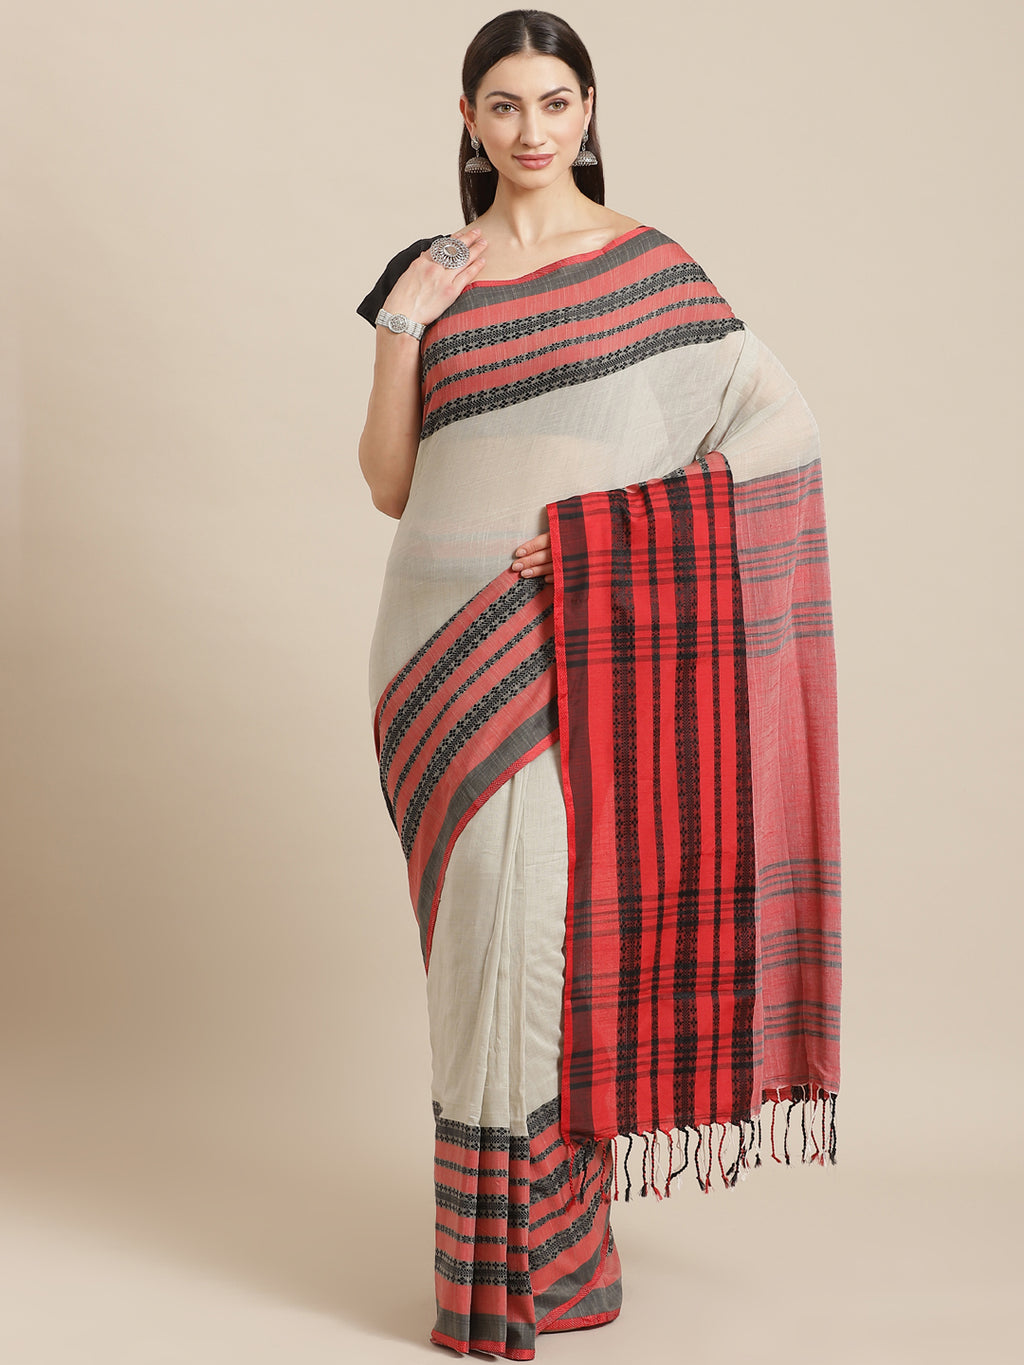 Red and Black, Kalakari India Cotton Red Hand crafted saree with blouse SHBESA0007-Saree-Kalakari India-SHBESA0007-Begumpuri, Bengal, Cotton, Geographical Indication, Hand Crafted, Heritage Prints, Natural Dyes, Red, Sarees, Sustainable Fabrics, Woven, Yellow-[Linen,Ethnic,wear,Fashionista,Handloom,Handicraft,Indigo,blockprint,block,print,Cotton,Chanderi,Blue, latest,classy,party,bollywood,trendy,summer,style,traditional,formal,elegant,unique,style,hand,block,print, dabu,booti,gift,present,glamo